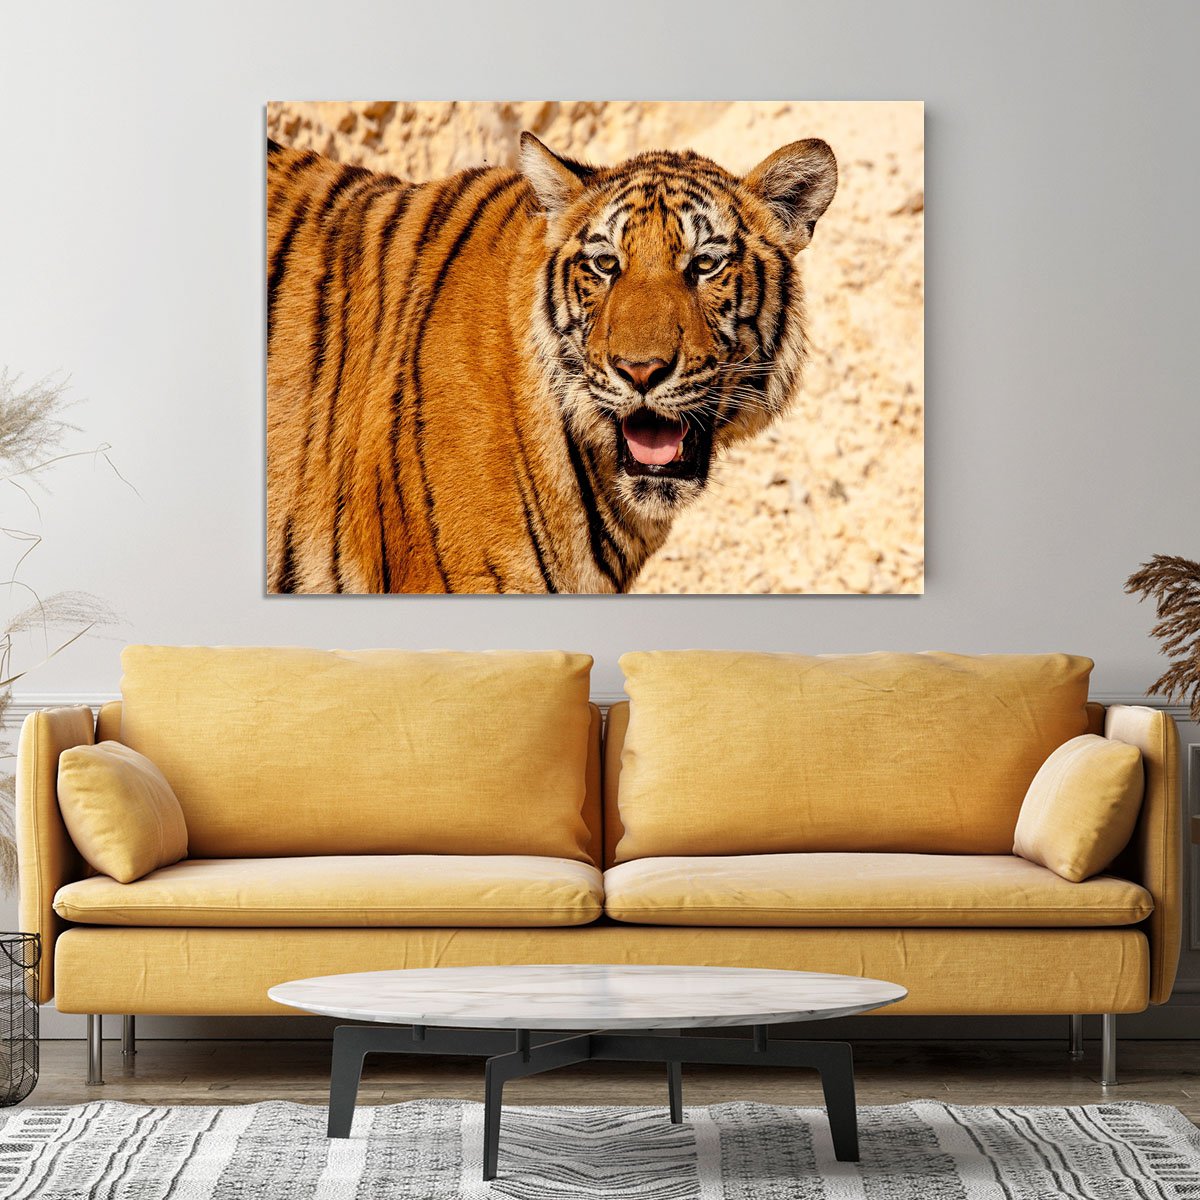 Tiger In The Heat Canvas Print or Poster